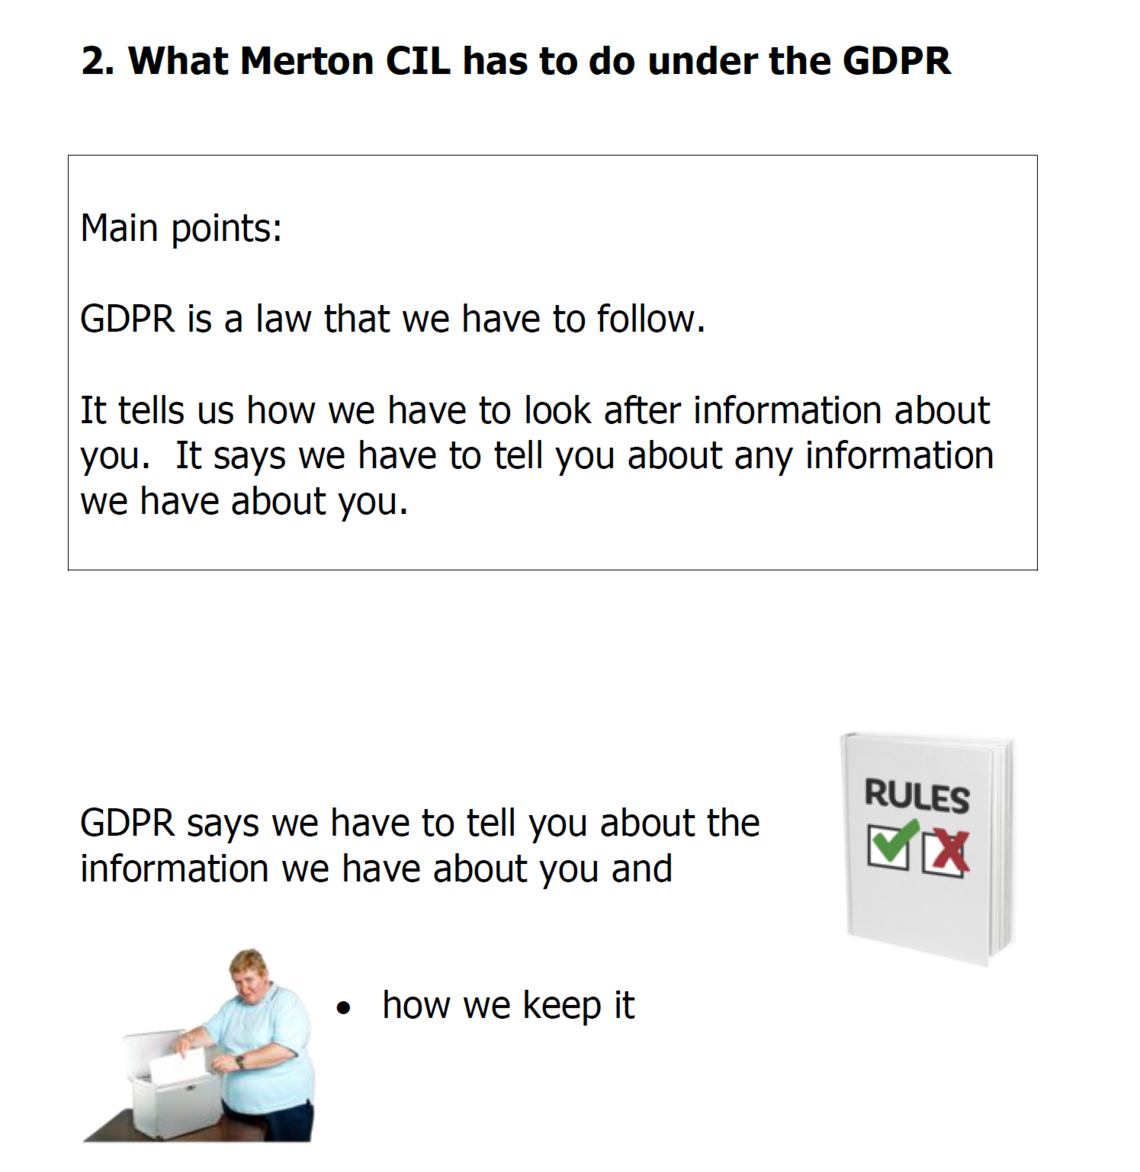 What Merton CIL has to do under the GDPR   Main points:  GDPR is a law that we have to follow.   It tells us how we have to look after information about you.  It says we have to tell you about any information we have about you.        GDPR says we have to tell you about the information we have about you and    •	how we keep it